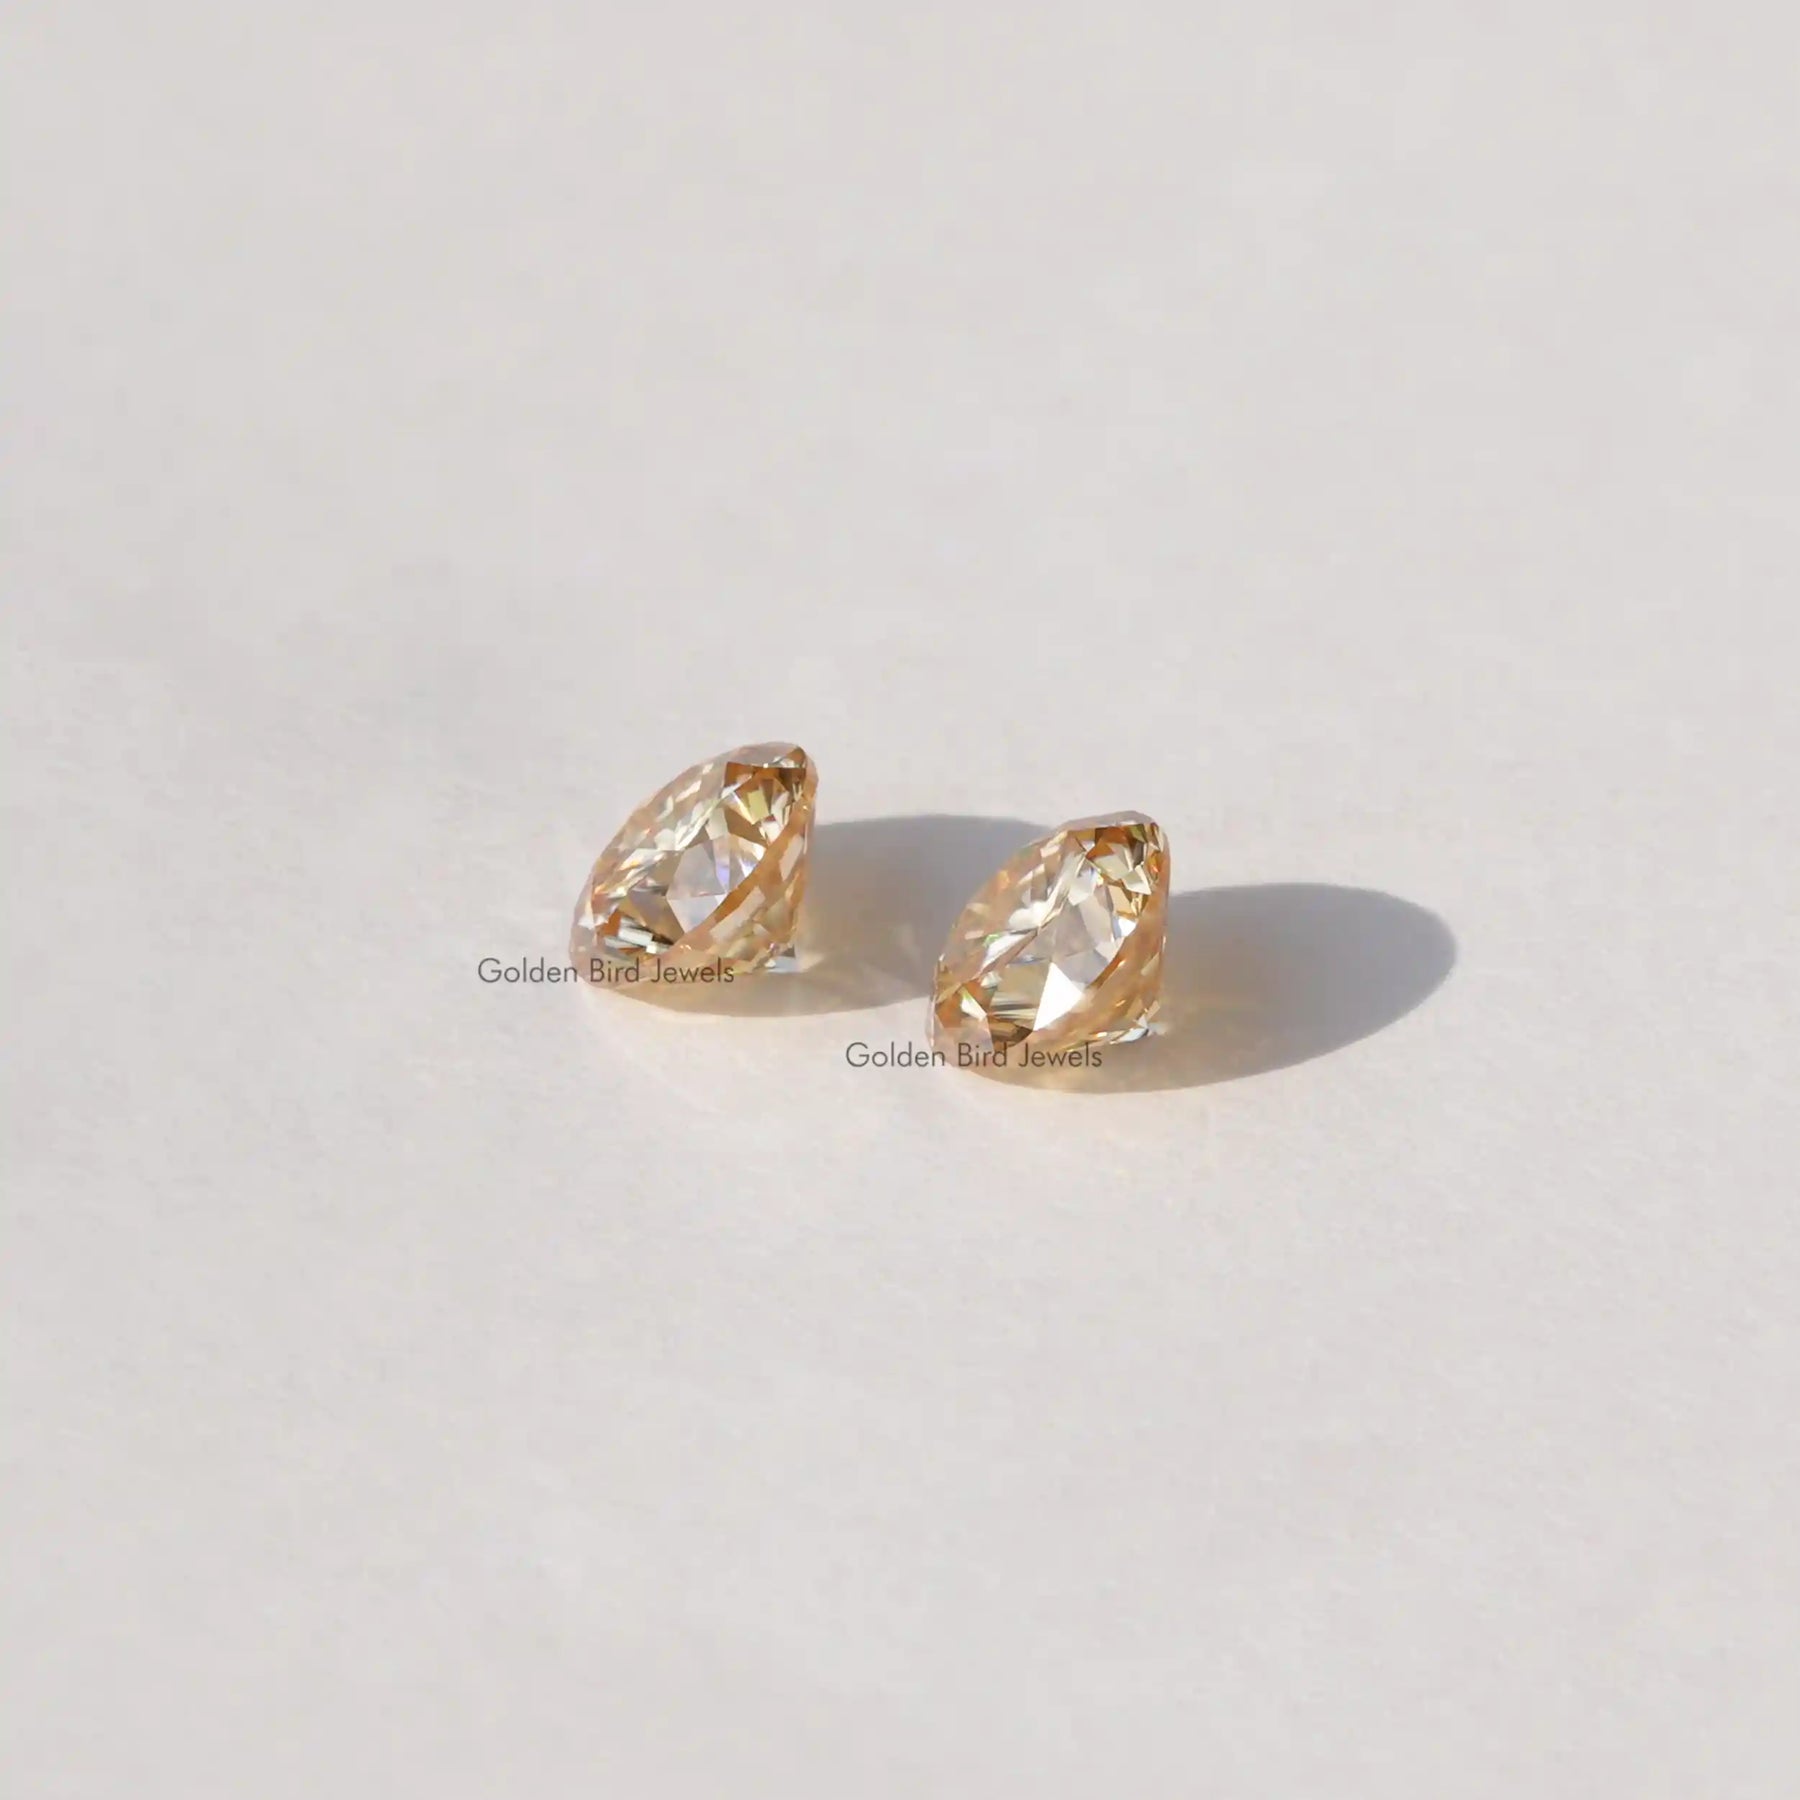 [Side view of round cut loose stones]-[Golden Bird Jewels]